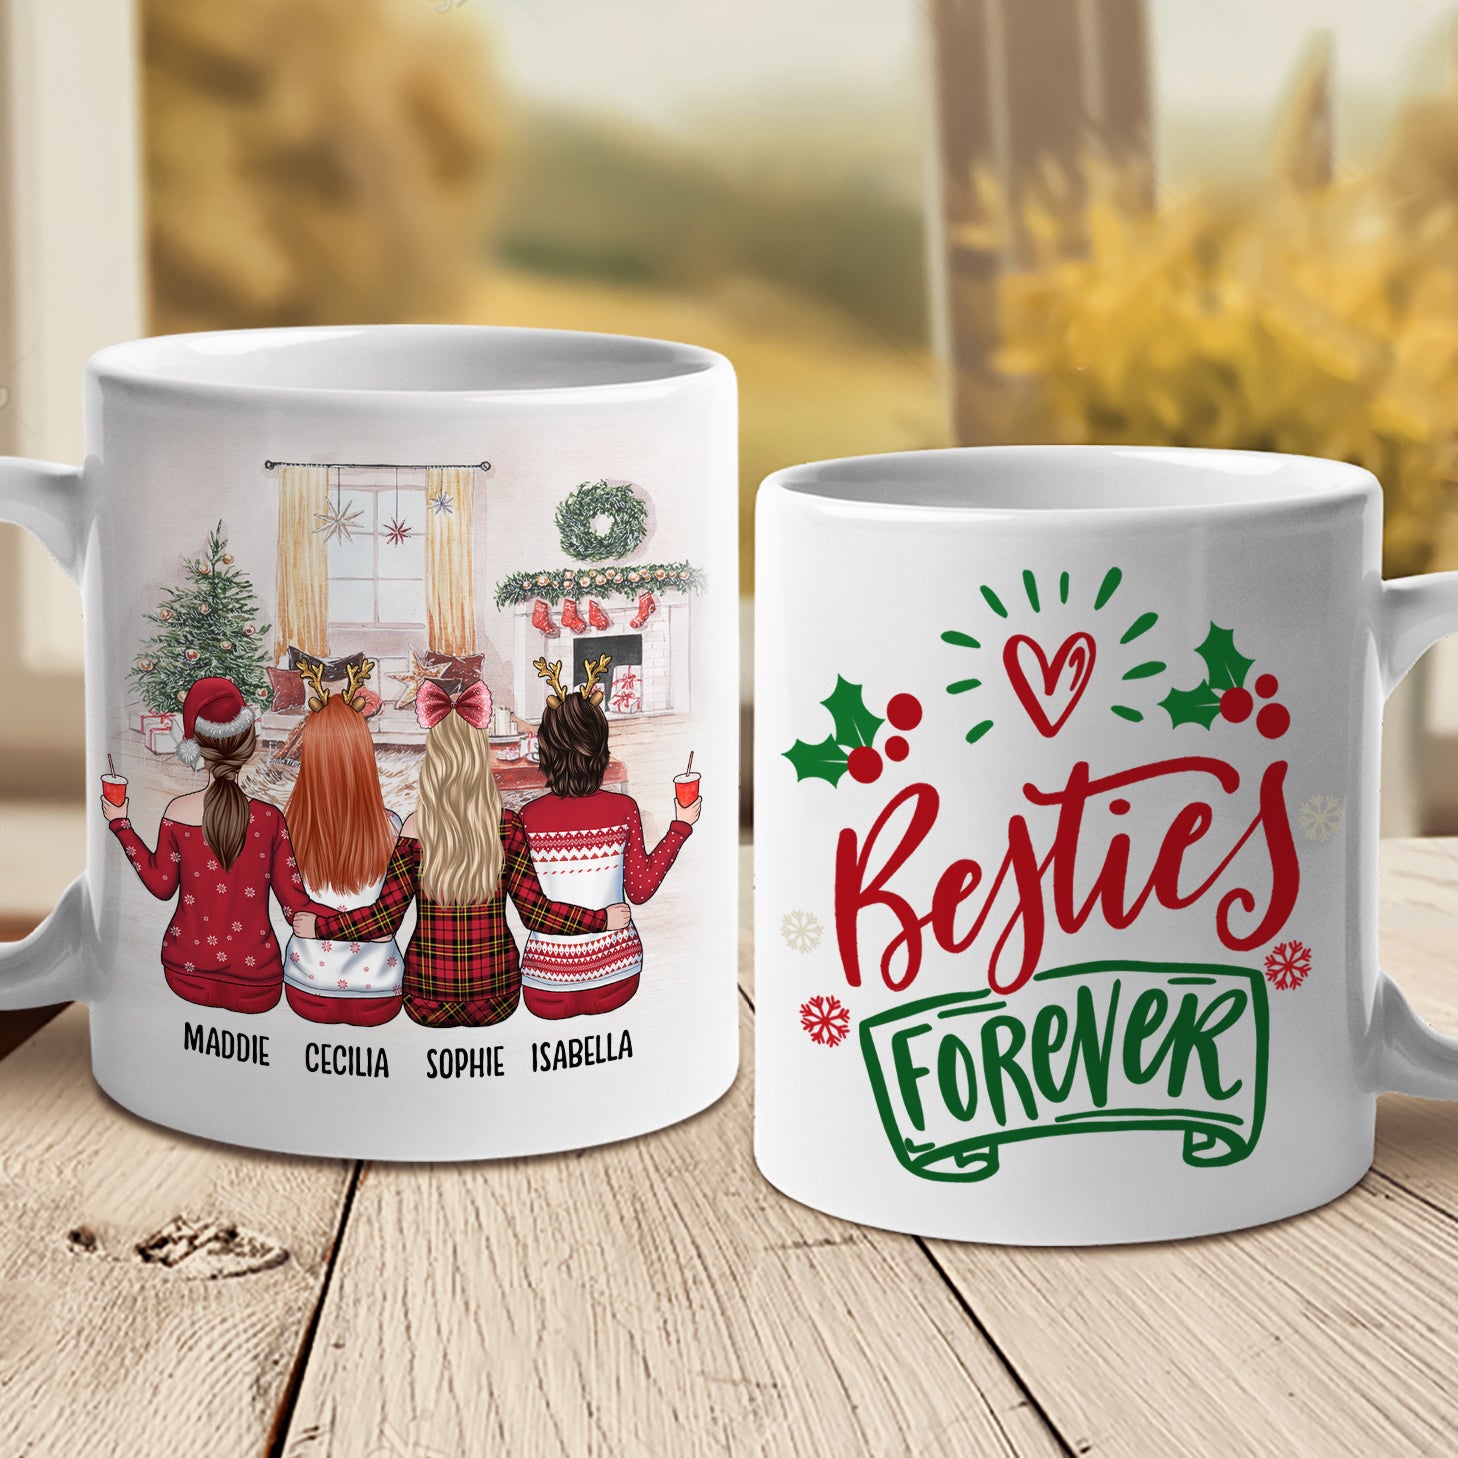 Besties Forever – Always Better Together – Personalized Mug